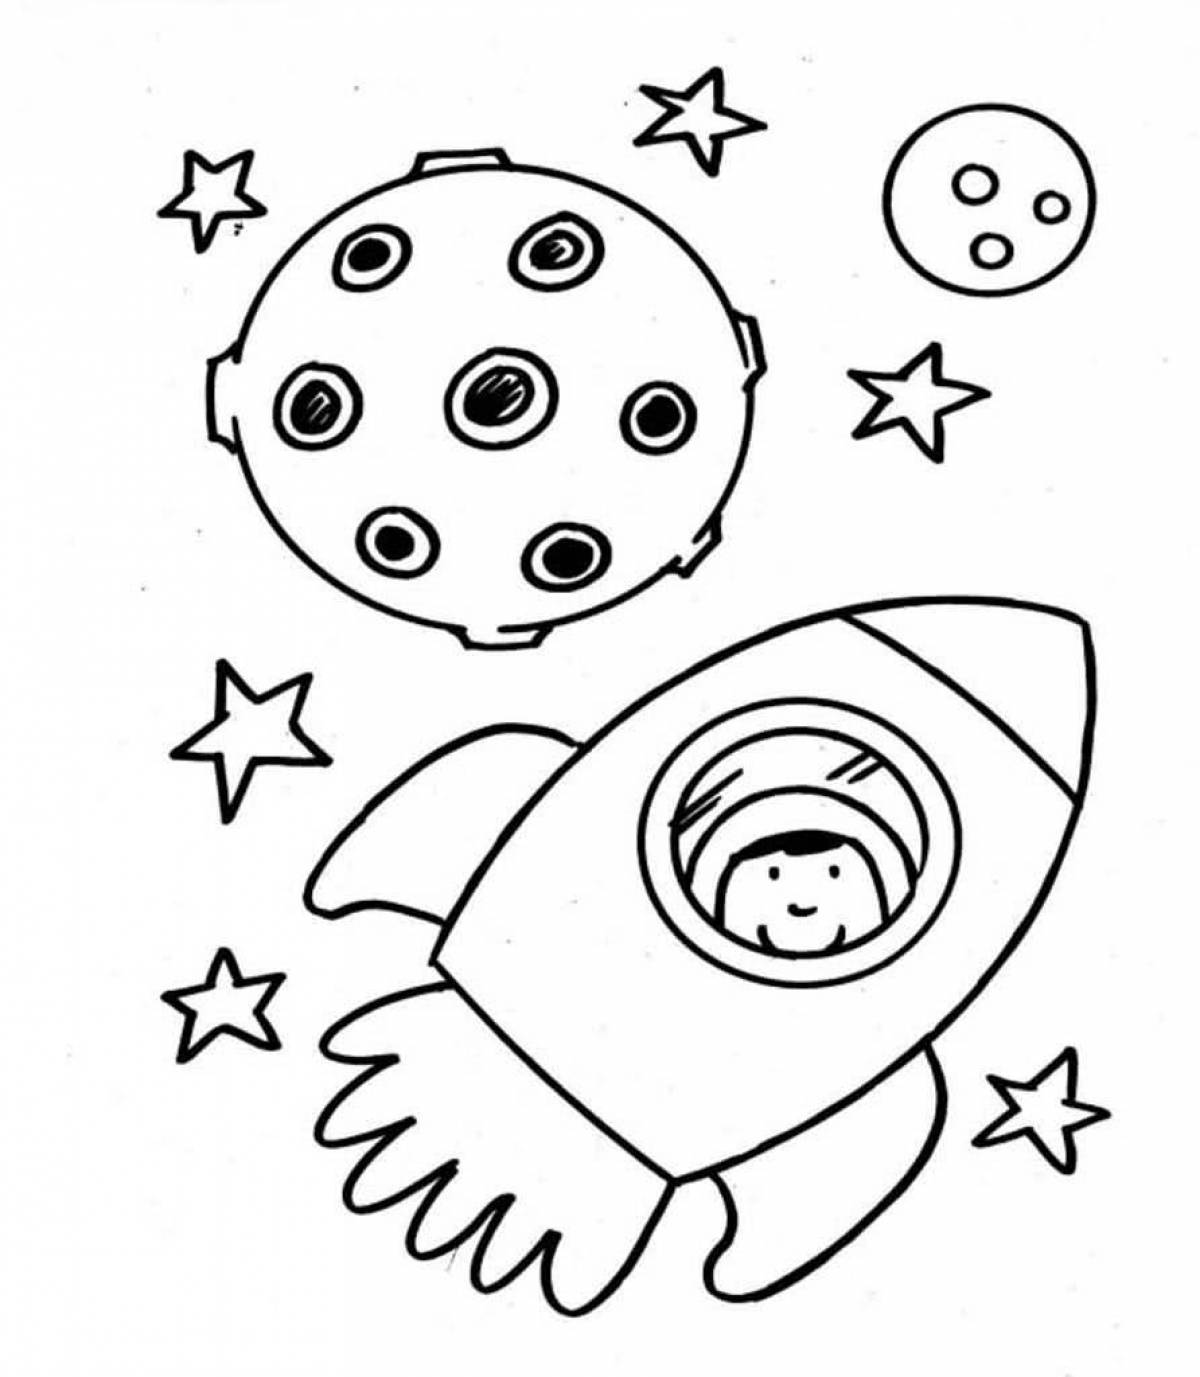 Amazing space coloring book for kids